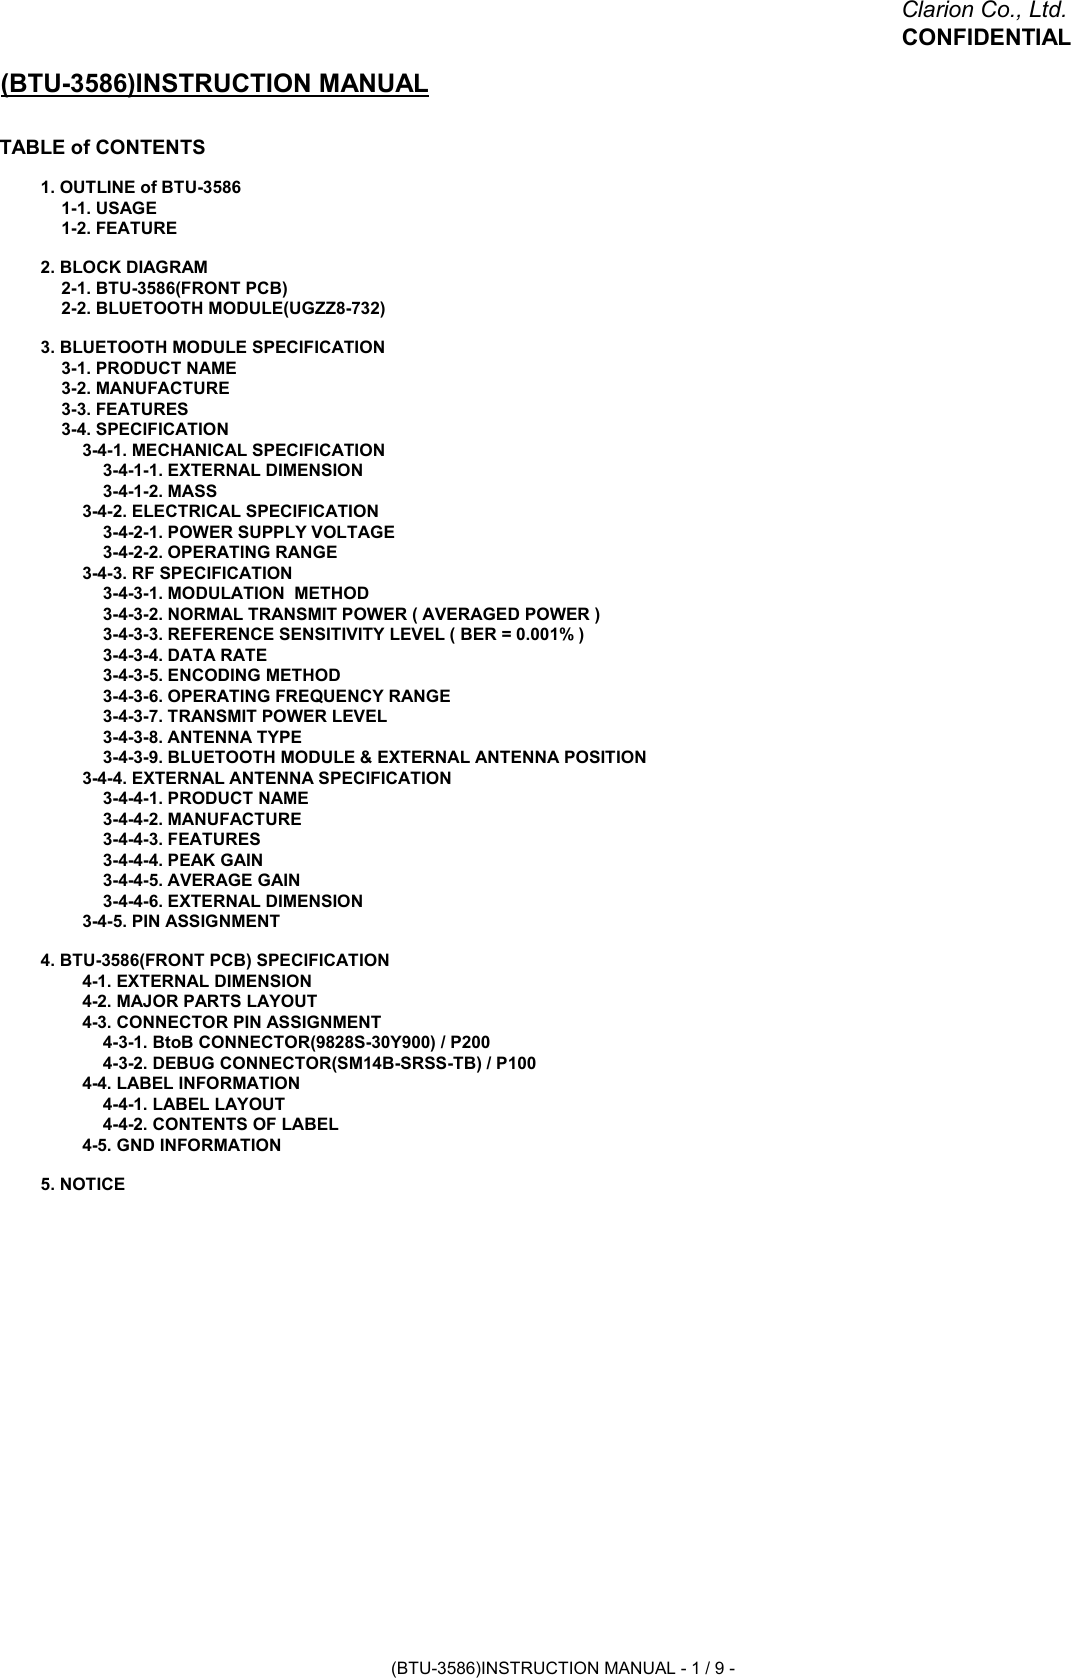 Clarion Co., Ltd.CONFIDENTIAL(BTU-3586)INSTRUCTION MANUALTABLE of CONTENTS1. OUTLINE of BTU-35861-1. USAGE1-2. FEATURE2. BLOCK DIAGRAM2-1. BTU-3586(FRONT PCB)2-2. BLUETOOTH MODULE(UGZZ8-732)3. BLUETOOTH MODULE SPECIFICATION3-1. PRODUCT NAME3-2. MANUFACTURE3-3. FEATURES3-4. SPECIFICATION3-4-1. MECHANICAL SPECIFICATION3-4-1-1. EXTERNAL DIMENSION3-4-1-2. MASS3-4-2. ELECTRICAL SPECIFICATION3-4-2-1. POWER SUPPLY VOLTAGE3-4-2-2. OPERATING RANGE3-4-3. RF SPECIFICATION3-4-3-1. MODULATION  METHOD3-4-3-2. NORMAL TRANSMIT POWER ( AVERAGED POWER )3-4-3-3. REFERENCE SENSITIVITY LEVEL ( BER = 0.001% )3-4-3-4. DATA RATE3-4-3-5. ENCODING METHOD3-4-3-6. OPERATING FREQUENCY RANGE3-4-3-7. TRANSMIT POWER LEVEL3-4-3-8. ANTENNA TYPE3-4-3-9. BLUETOOTH MODULE &amp; EXTERNAL ANTENNA POSITION3-4-4. EXTERNAL ANTENNA SPECIFICATION3-4-4-1. PRODUCT NAME3-4-4-2. MANUFACTURE3-4-4-3. FEATURES3-4-4-4. PEAK GAIN3-4-4-5. AVERAGE GAIN3-4-4-6. EXTERNAL DIMENSION3-4-5. PIN ASSIGNMENT4. BTU-3586(FRONT PCB) SPECIFICATION4-1. EXTERNAL DIMENSION4-2. MAJOR PARTS LAYOUT4-3. CONNECTOR PIN ASSIGNMENT4-3-1. BtoB CONNECTOR(9828S-30Y900) / P2004-3-2. DEBUG CONNECTOR(SM14B-SRSS-TB) / P1004-4. LABEL INFORMATION4-4-1. LABEL LAYOUT4-4-2. CONTENTS OF LABEL4-5. GND INFORMATION5. NOTICE(BTU-3586)INSTRUCTION MANUAL - 1 / 9 -